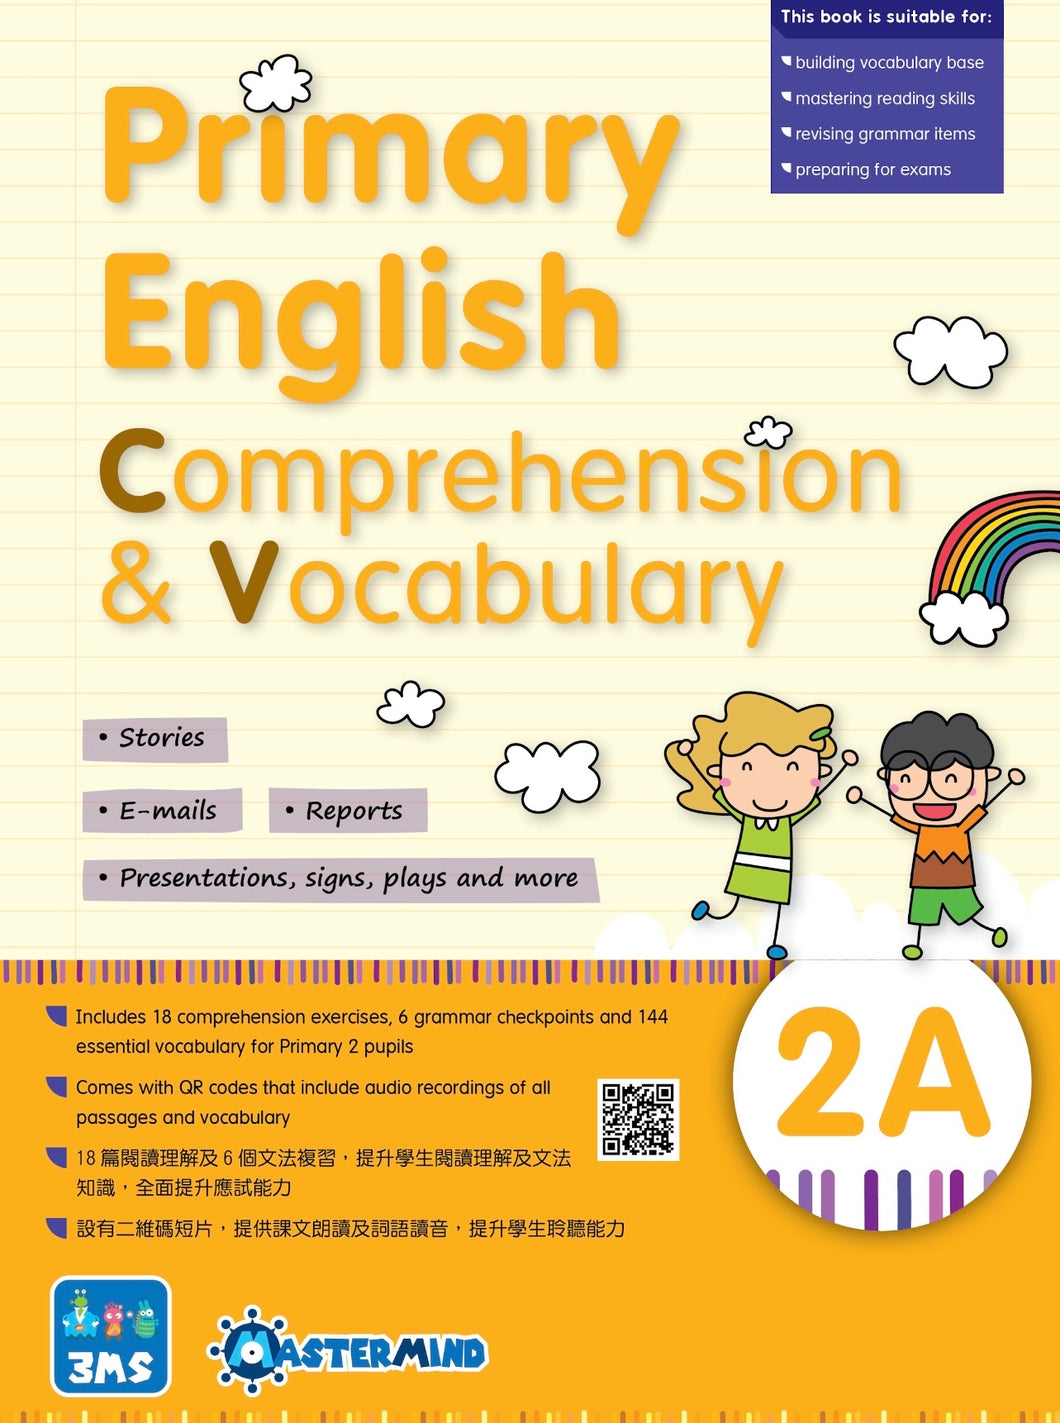 3MS Primary English Comprehension & Vocabulary 2A